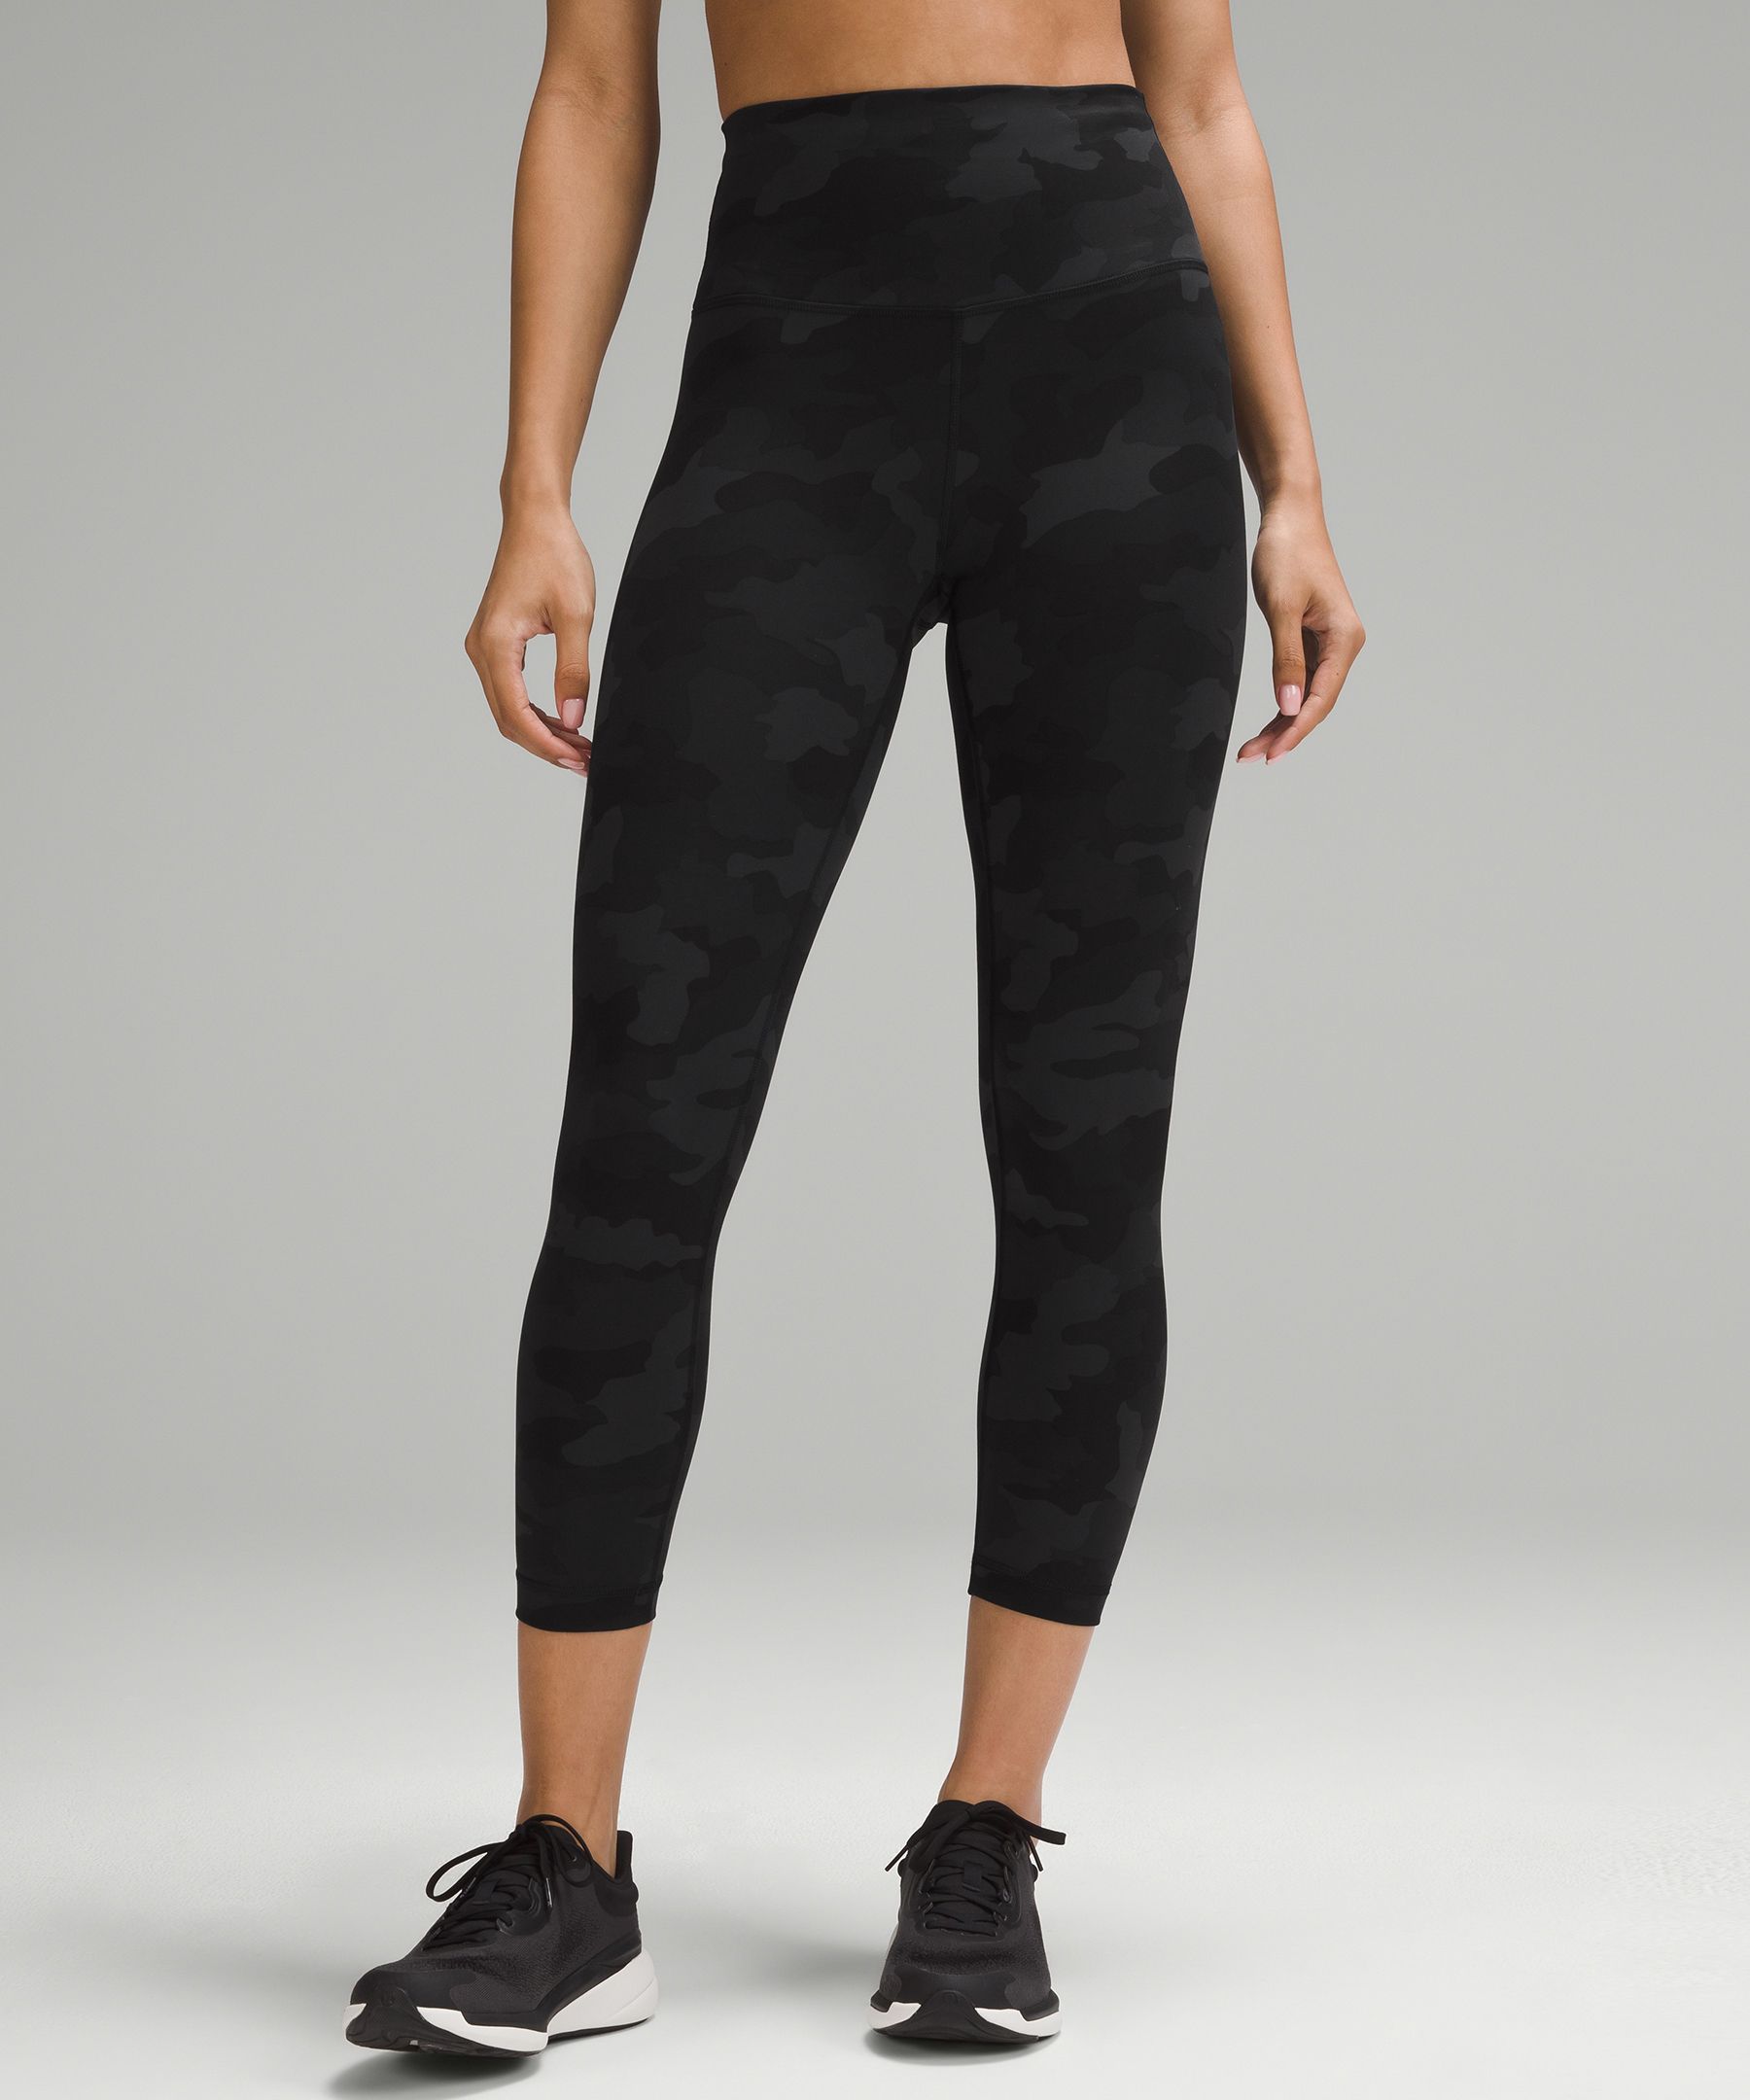 Lululemon Align T-Shirt Intertwined Camo Deep Coal Multi Black Size 10 -  $24 (64% Off Retail) - From Ashleigh